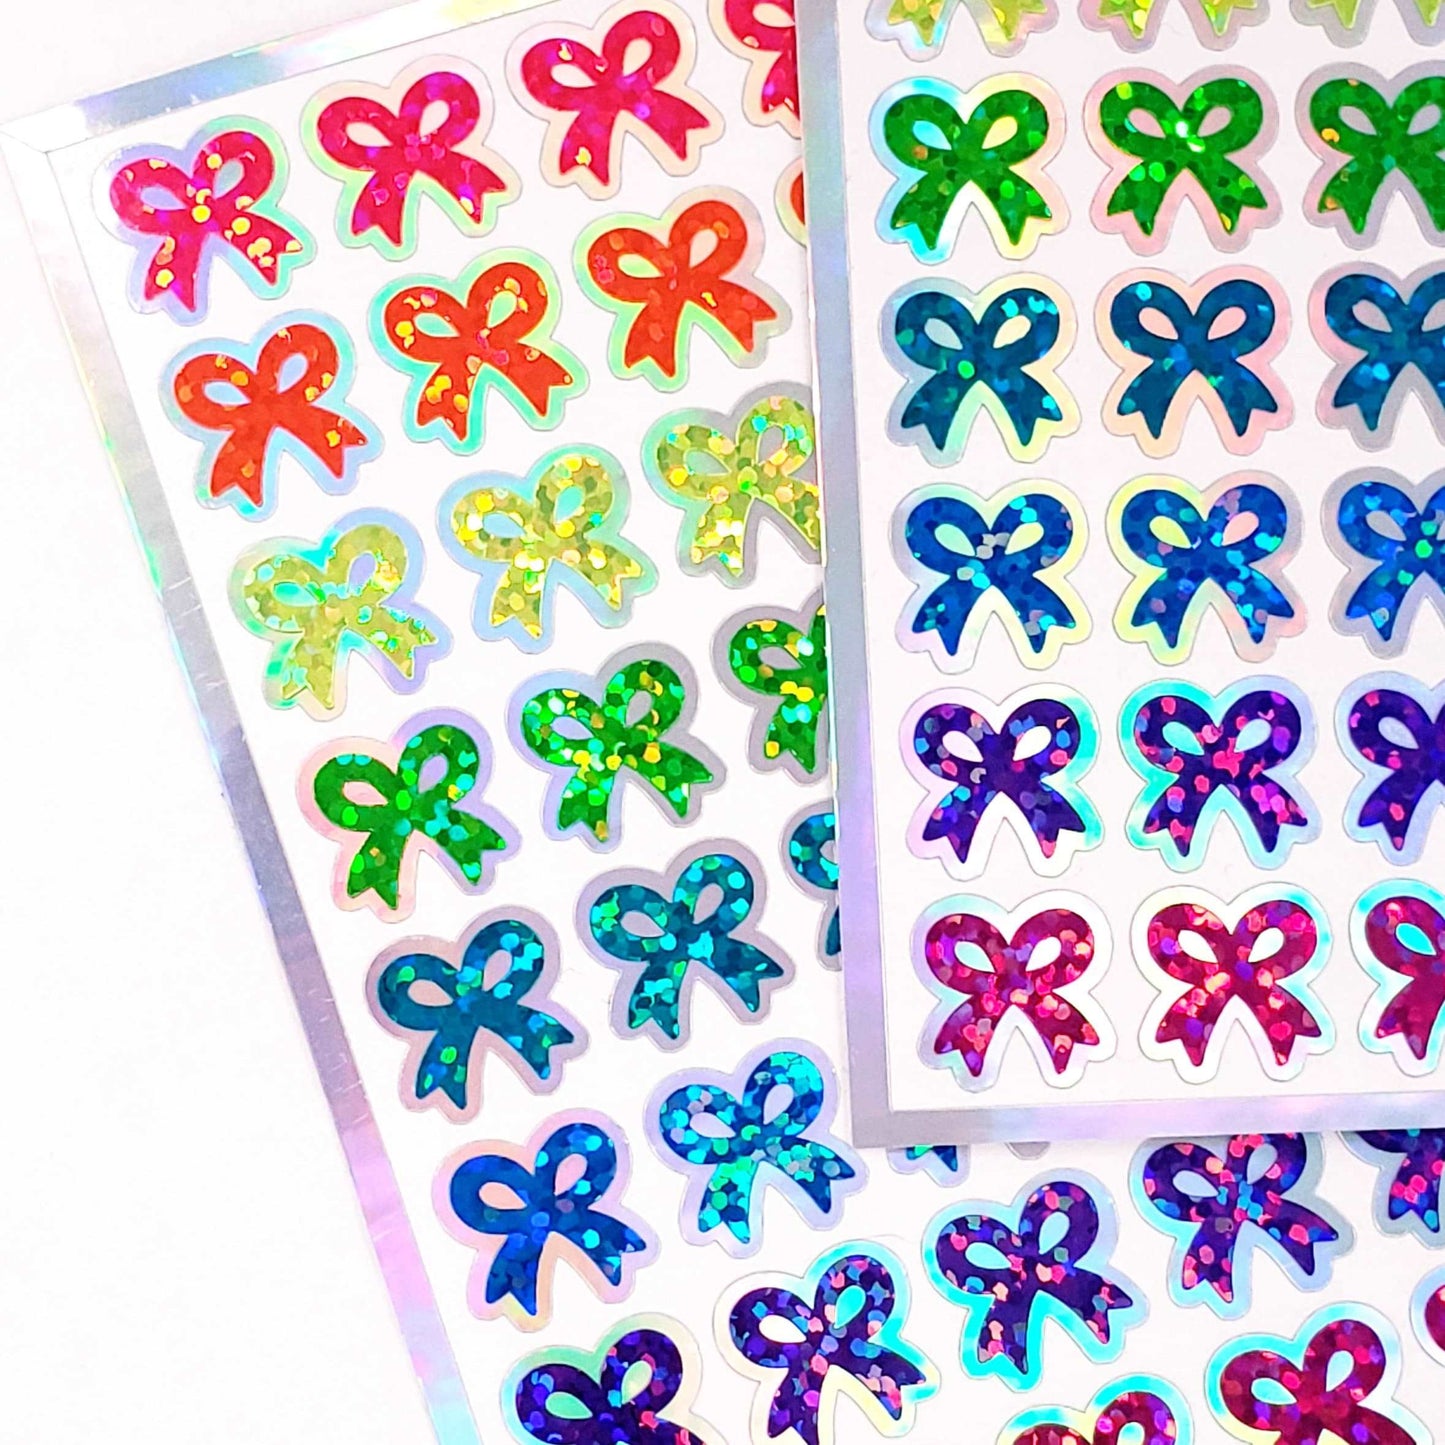 Bow Stickers, set of 88 small ribbon stickers in neon rainbow colors, peel and stick decals for planners, journals, gift tags and cards.